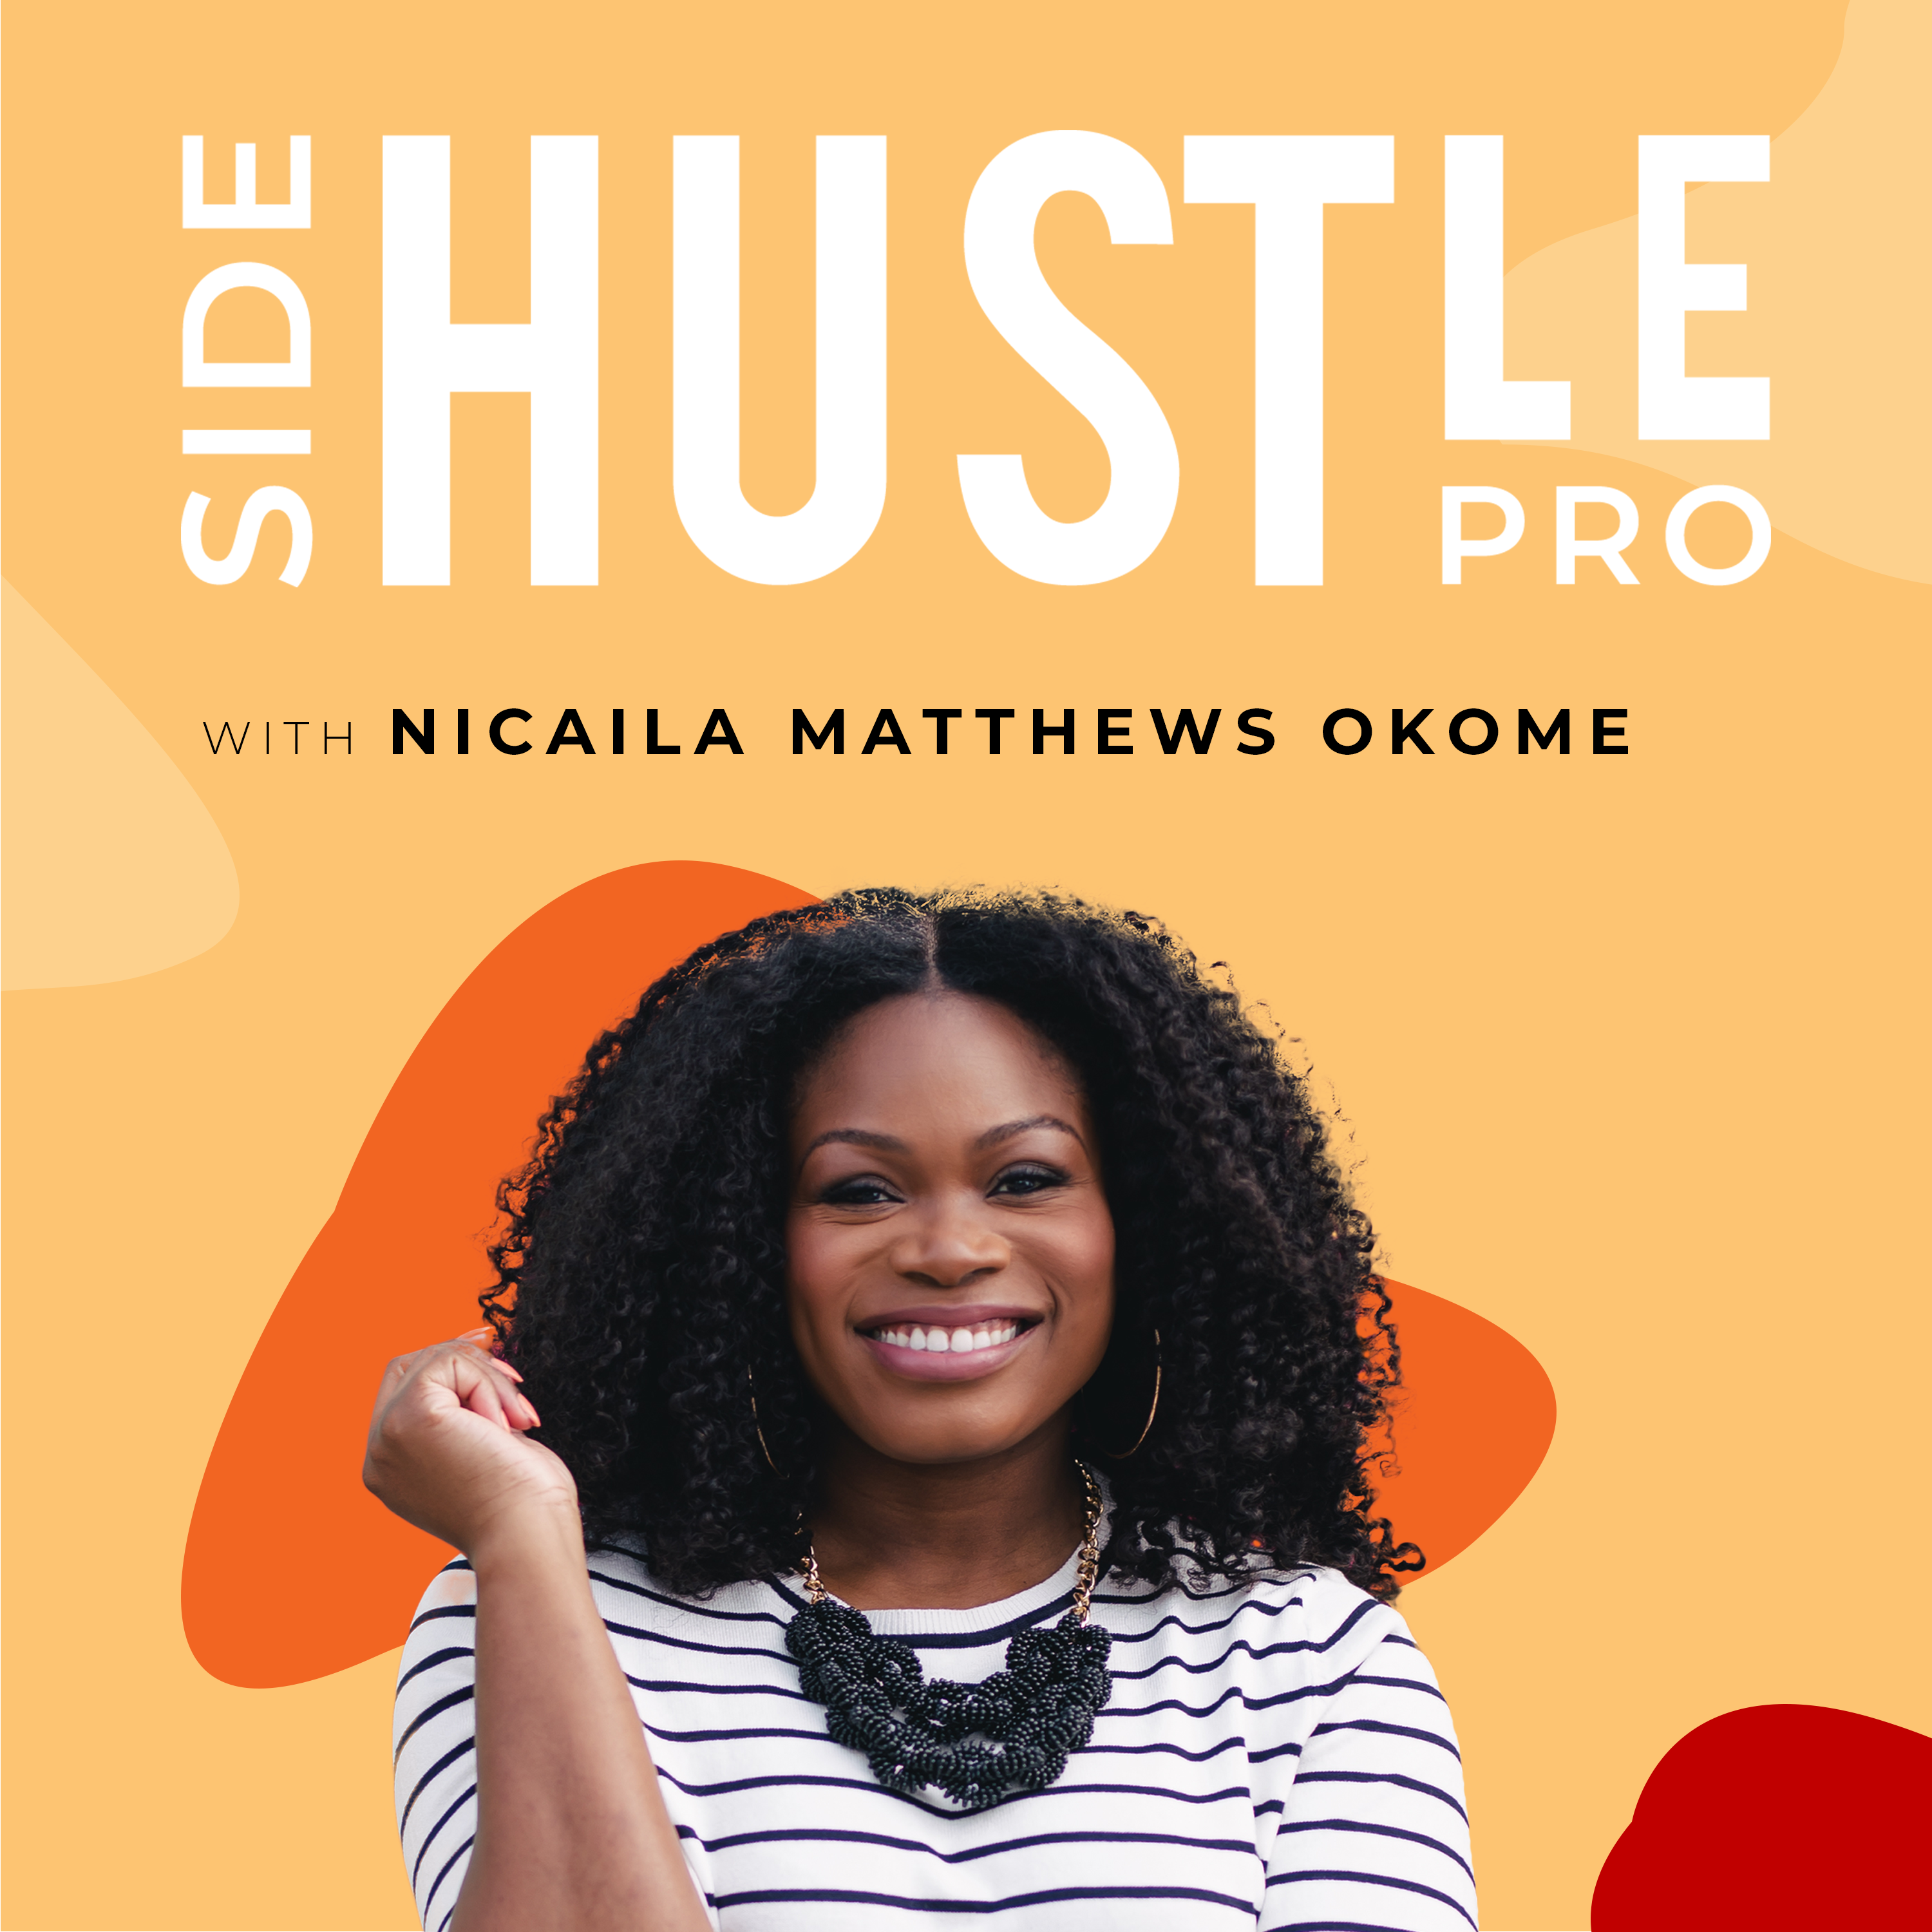 232-  Just Do It! Don’t Procrastinate, Start Your Side Hustle This Year